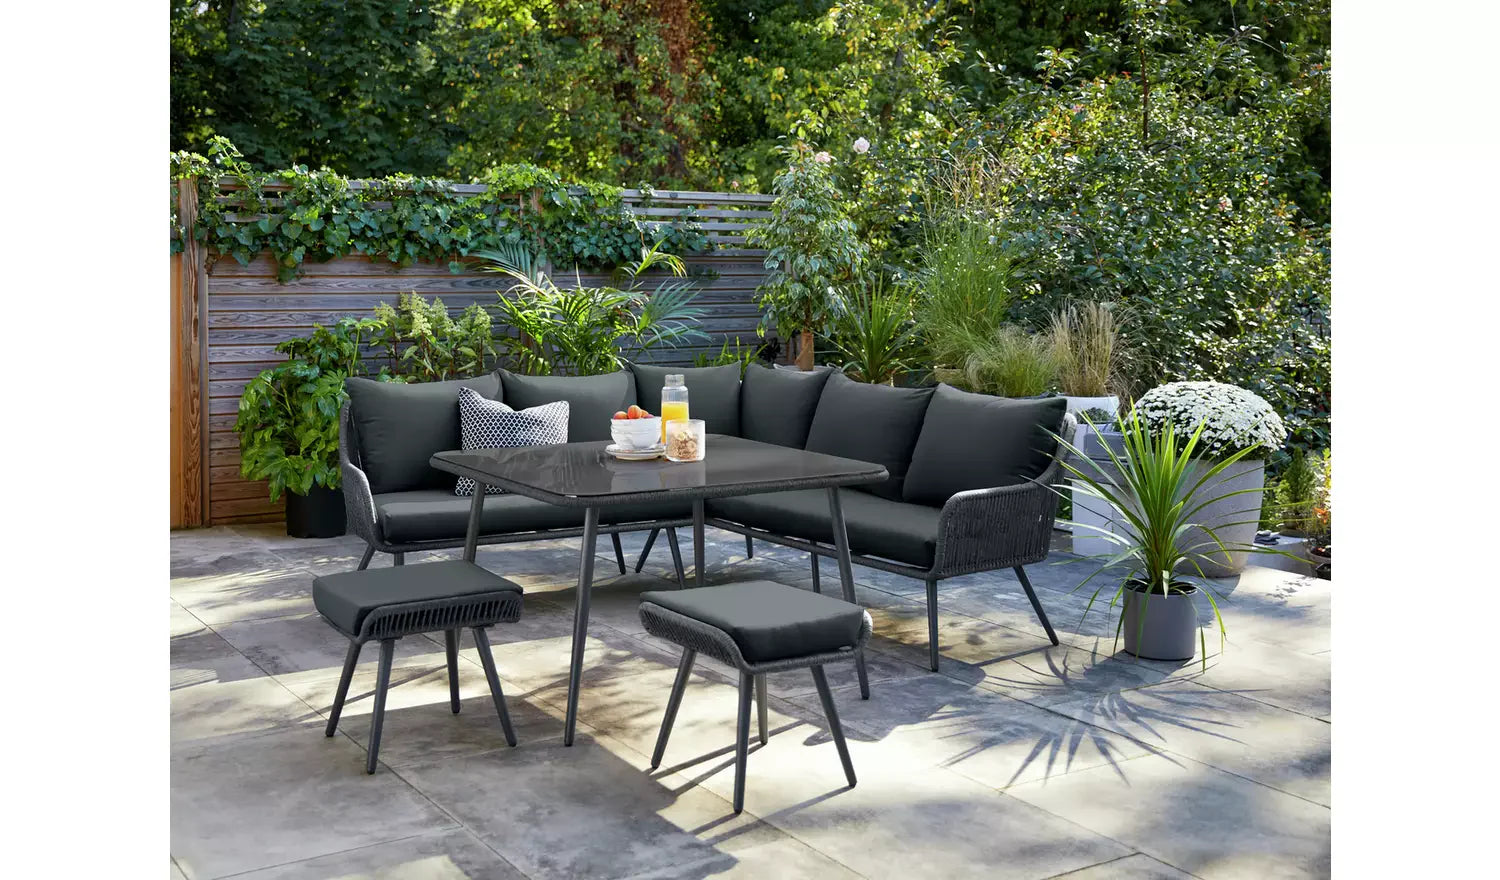 FURNIZY OUTDOOR SOFA SET 5 SEATER,2 OTTOMAN AND 1 CENTER TABLE